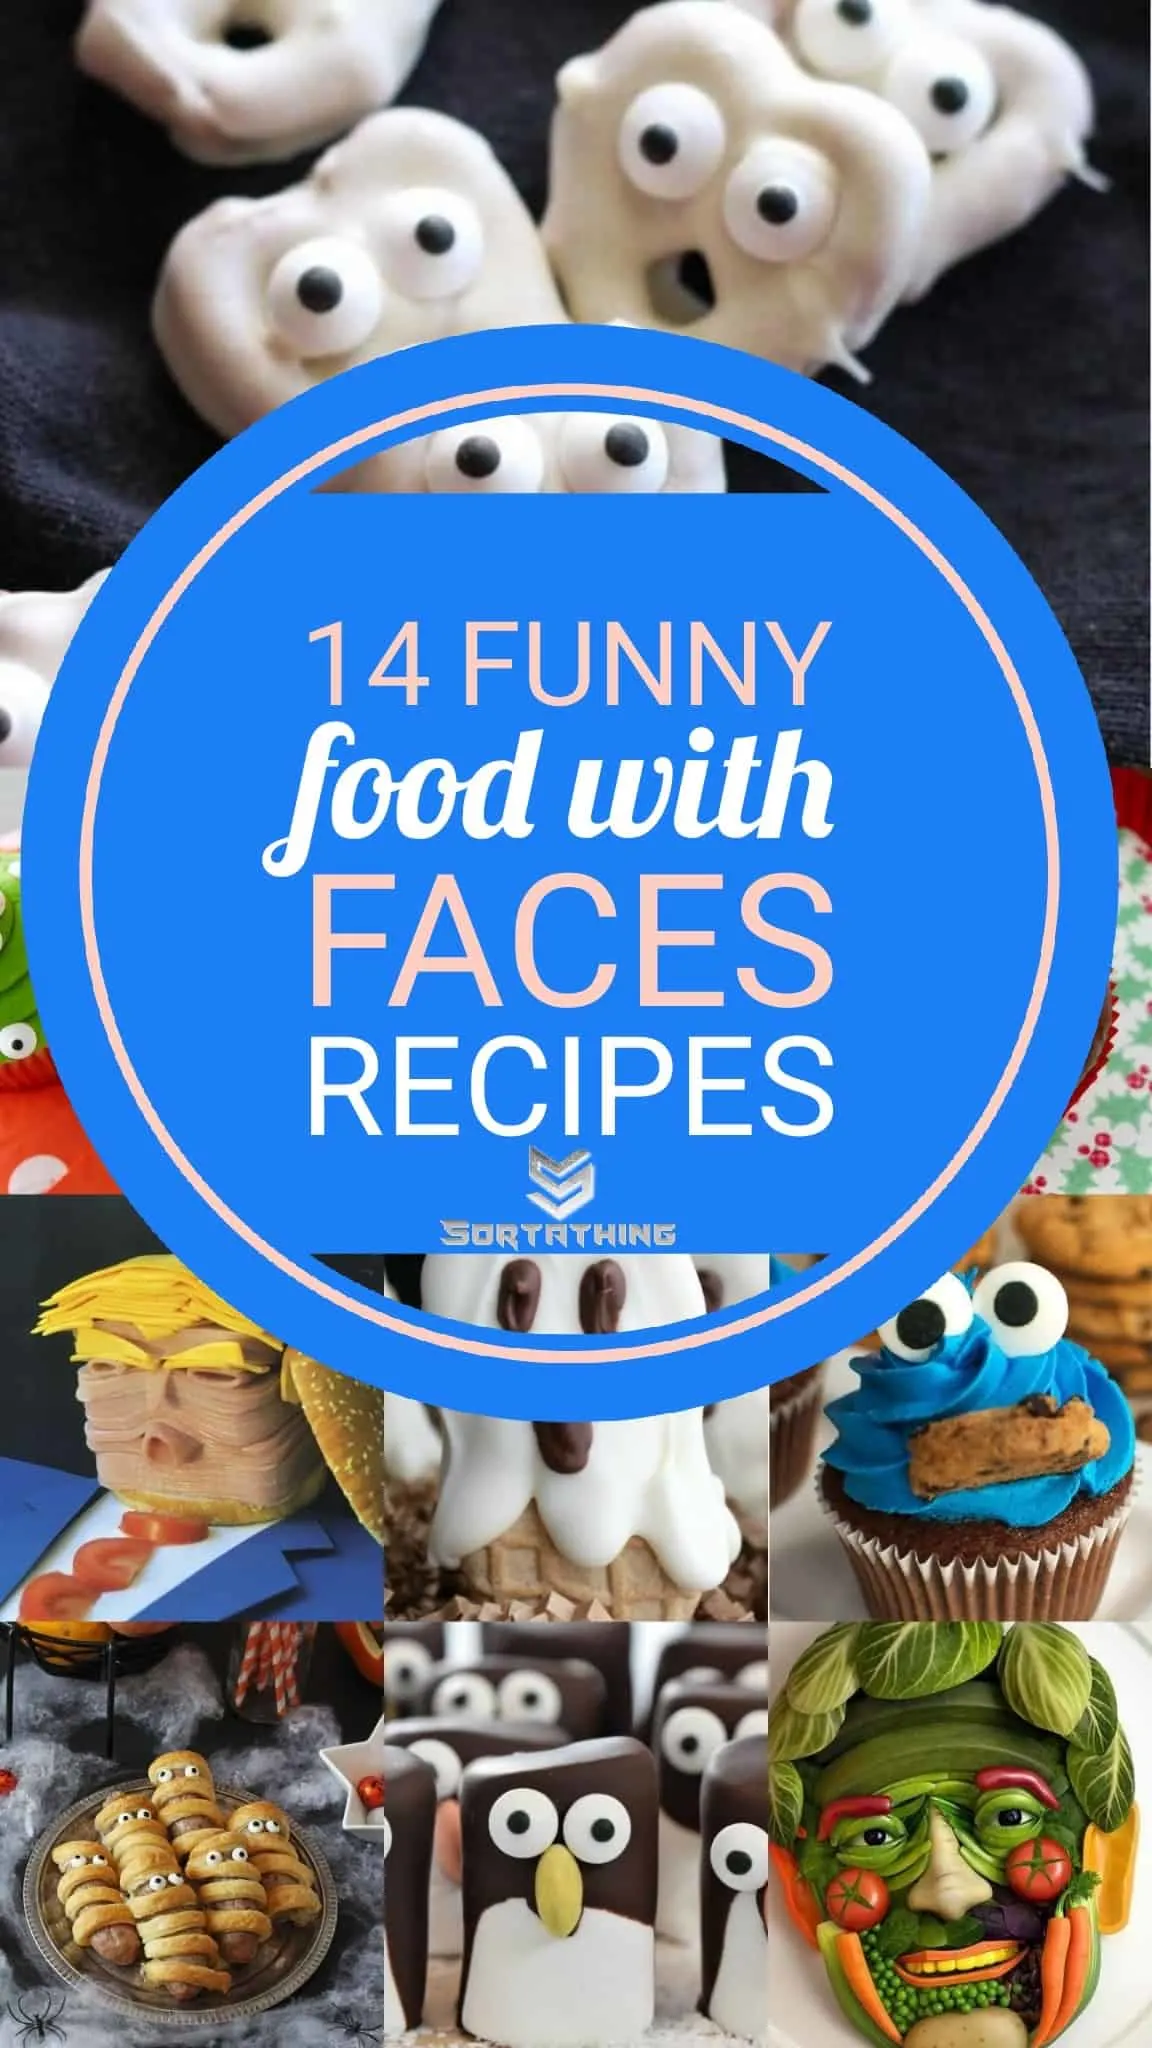 14 Funny Food with Faces Recipes